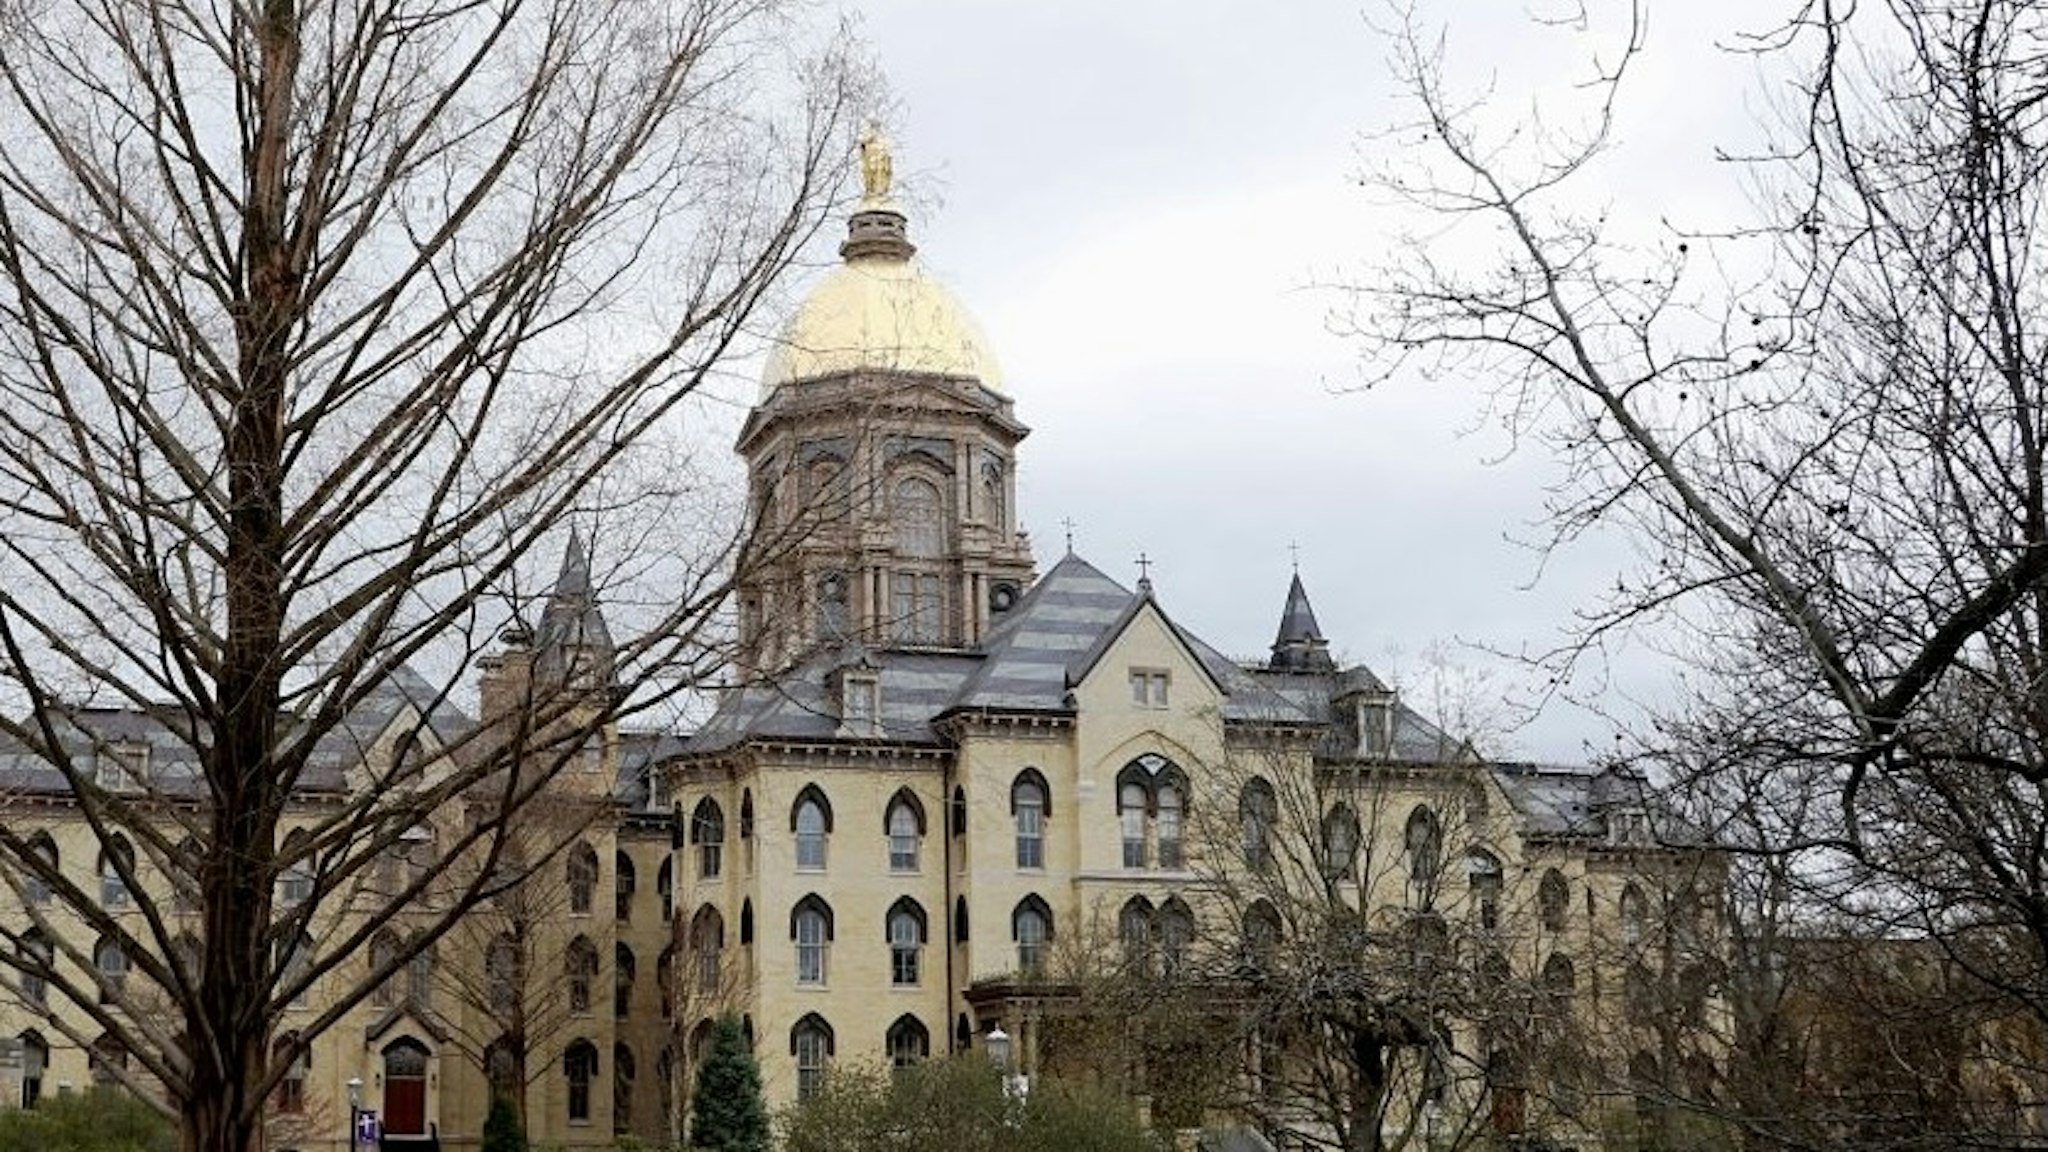 Campus scene University of Notre Dame in South Bend Indiana. (Photo by: Don &amp; Melinda Crawford/Education Images/Universal Images Group via Getty Images)